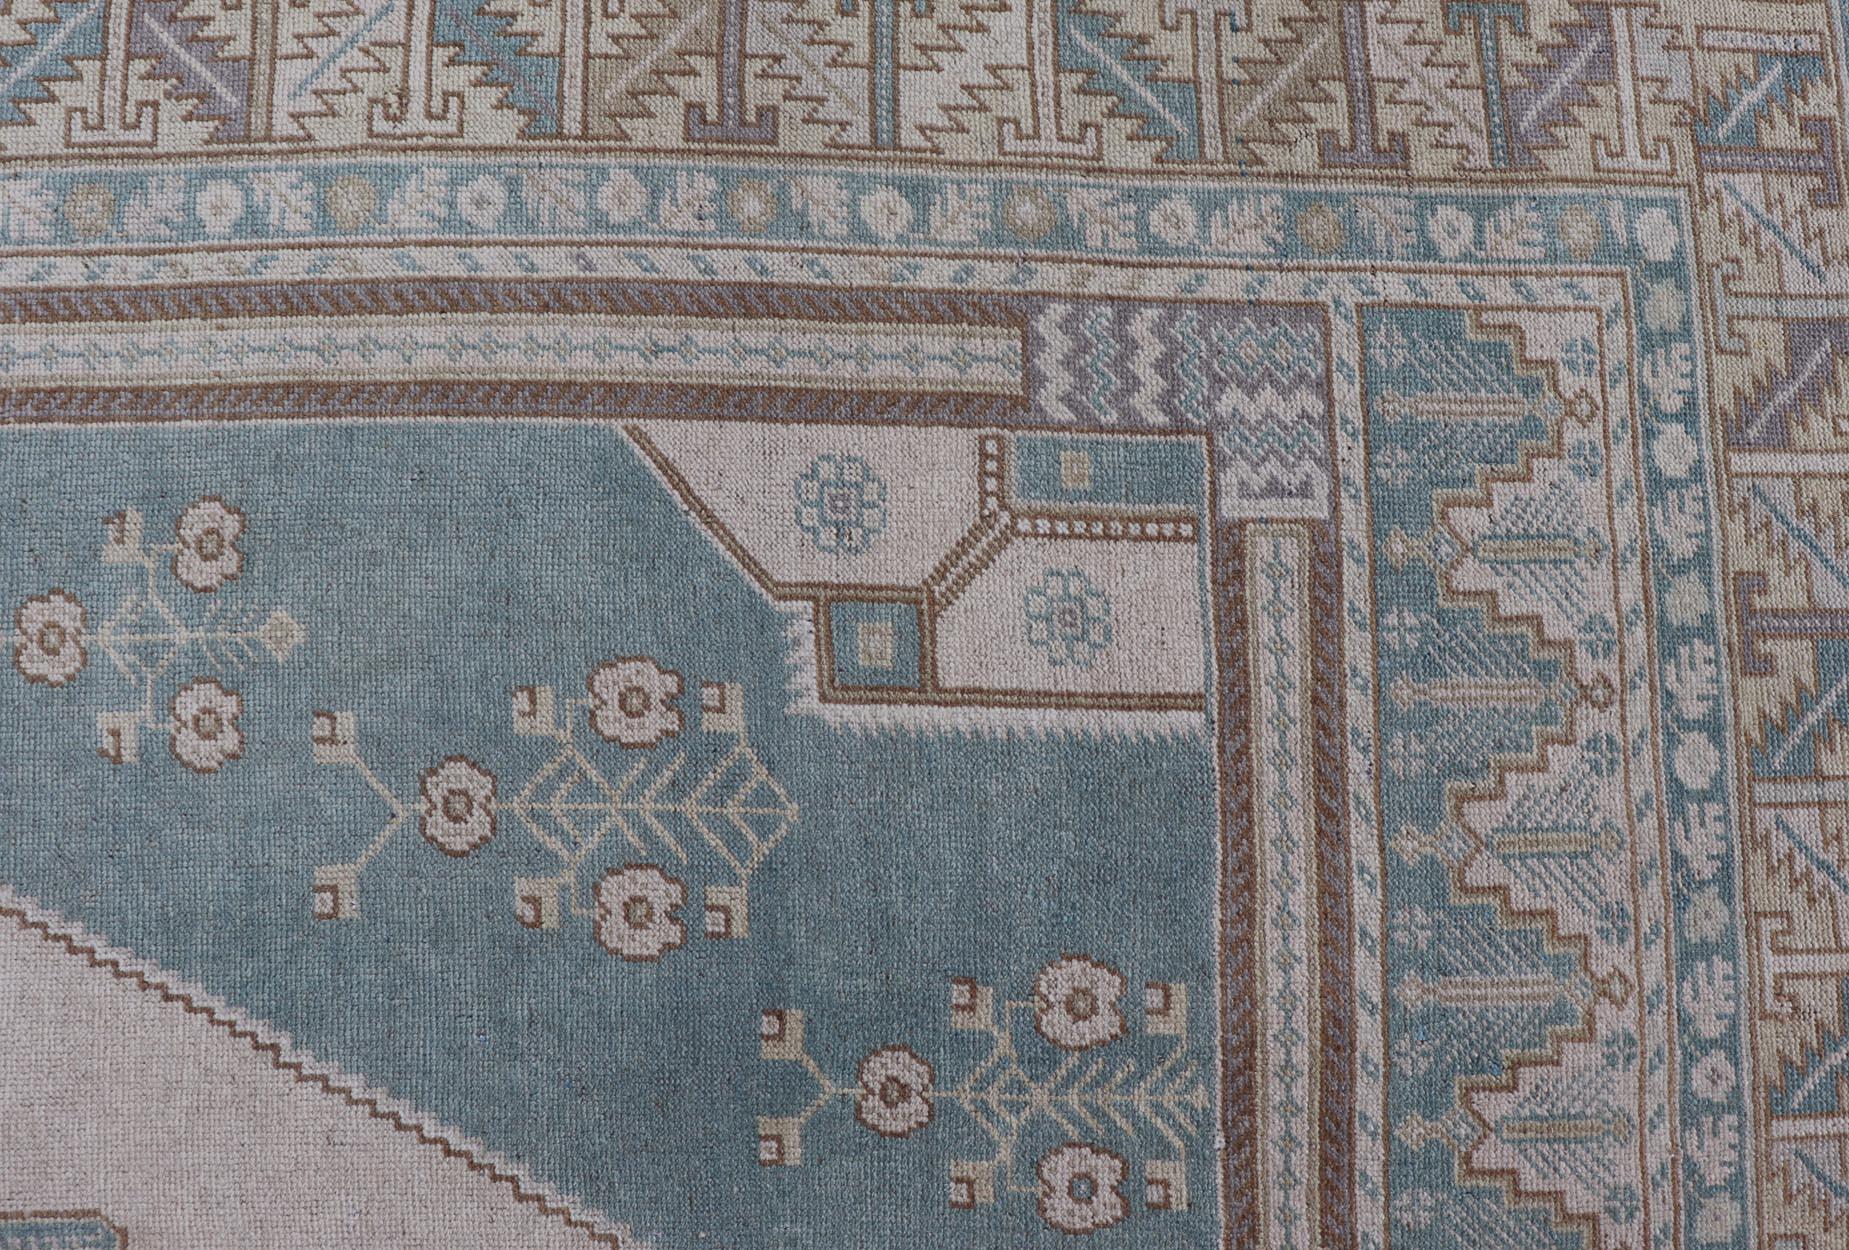 Faded vintage Turkish Oushak rug with Central Medallion in cream and blue, 
rug TU-MTU-6011, country of origin / type: Turkey / Oushak, circa 1940

This sublime and enchanting vintage rug, a gorgeous Oushak rug made in Turkey during the mid-20th